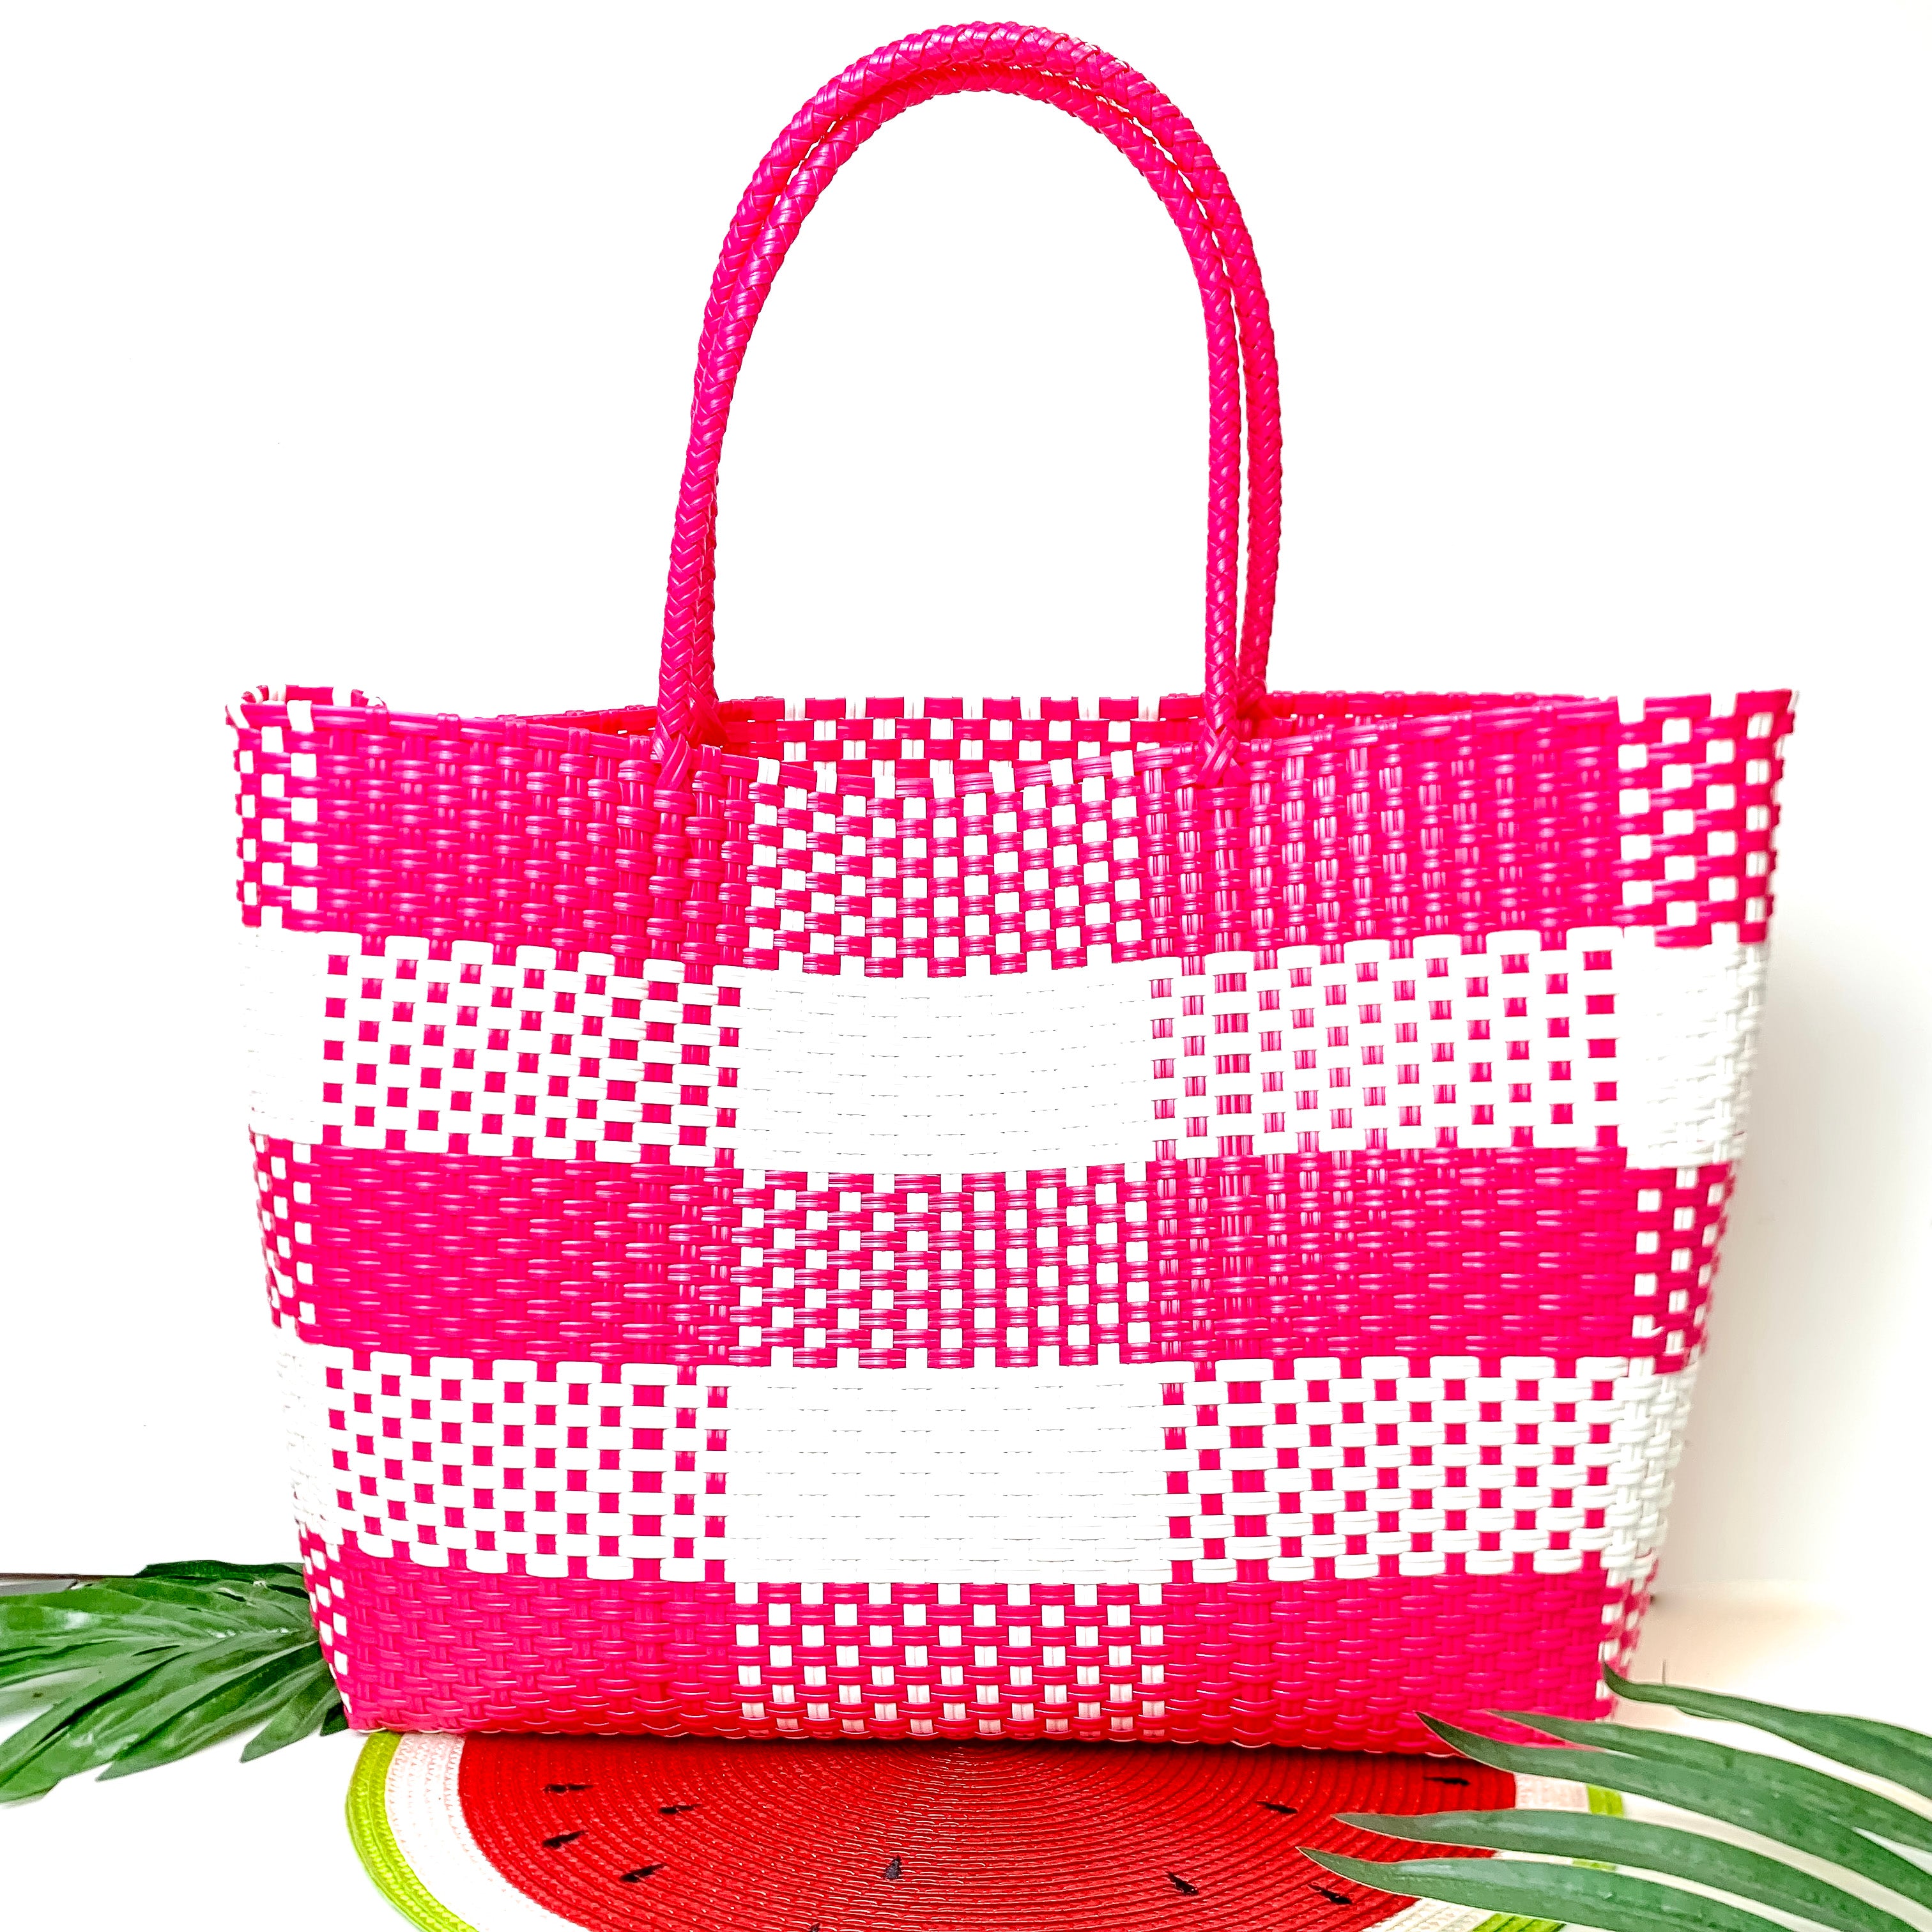 Garden Party Gingham Tote Bag in Neon Pink and White - Giddy Up Glamour Boutique